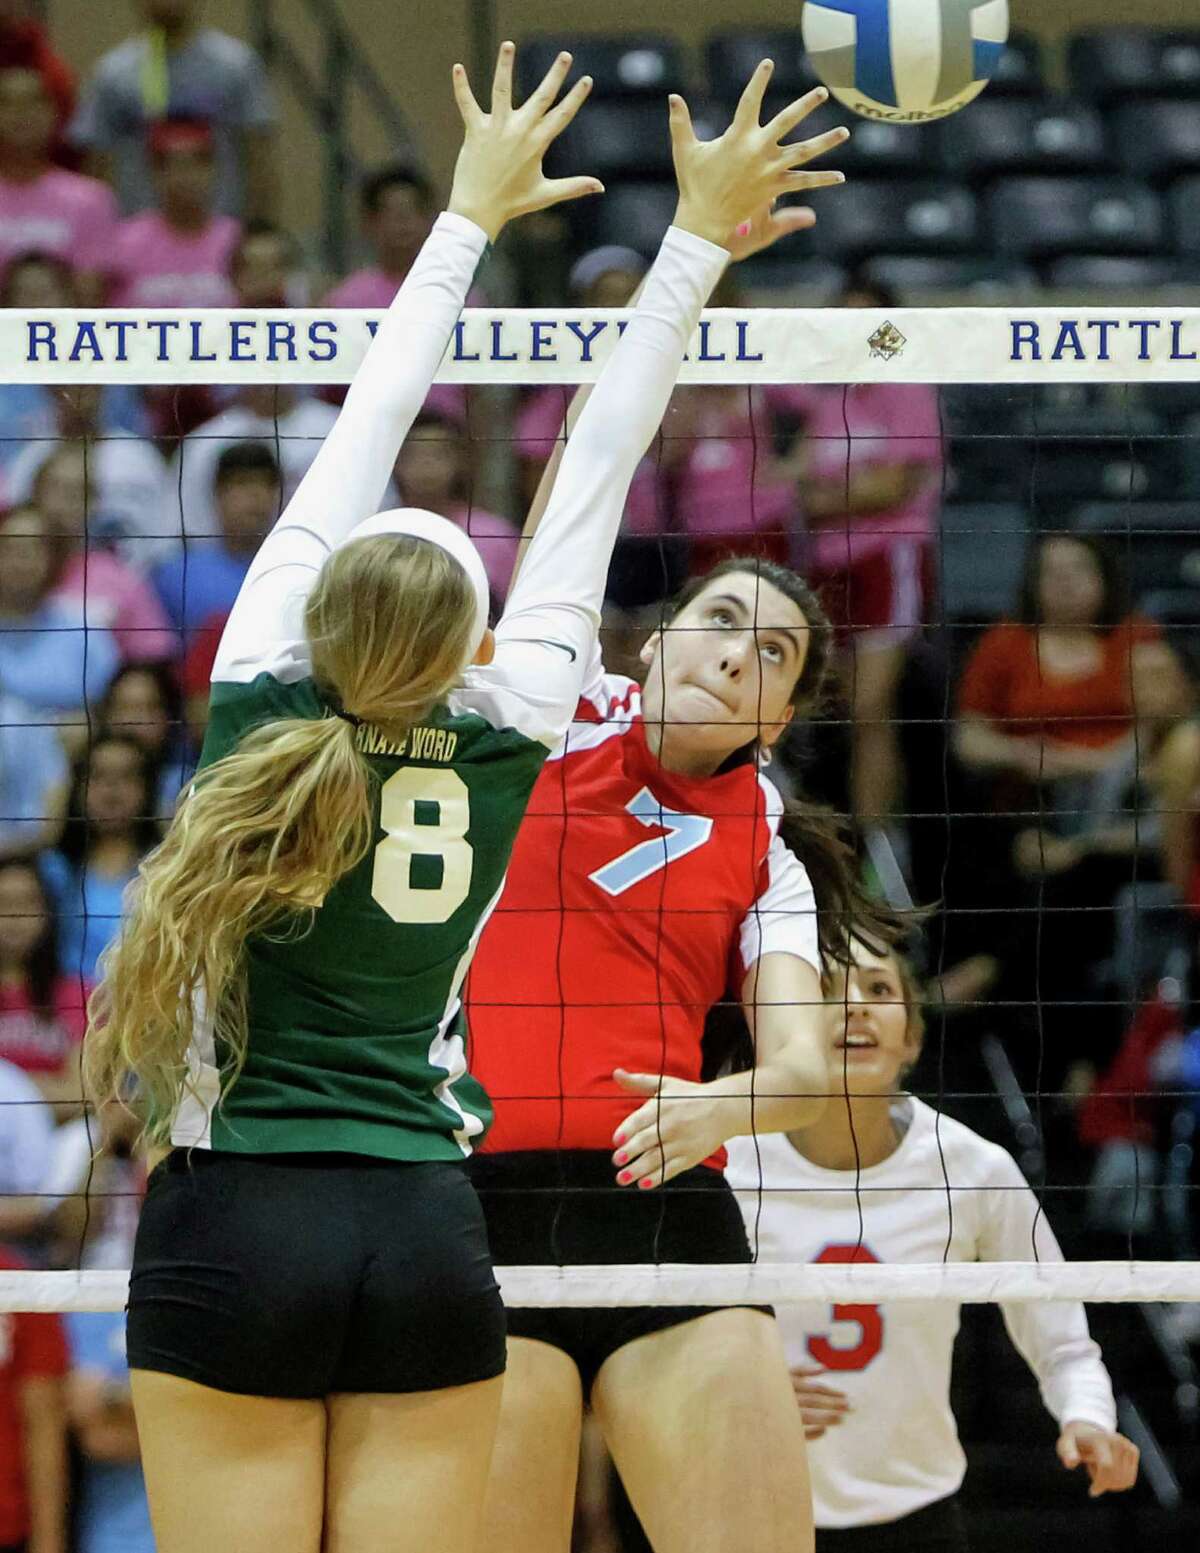 Antonian's Emilie Boren (center) tries to get a shot past Incarnate Word's Alyssa Narendorf as Emily Ramirez looks on during their match at Grehey Arena on Wednesday, Oct. 9, 2013. MARVIN PFEIFFER/ mpfeiffer@express-news.net